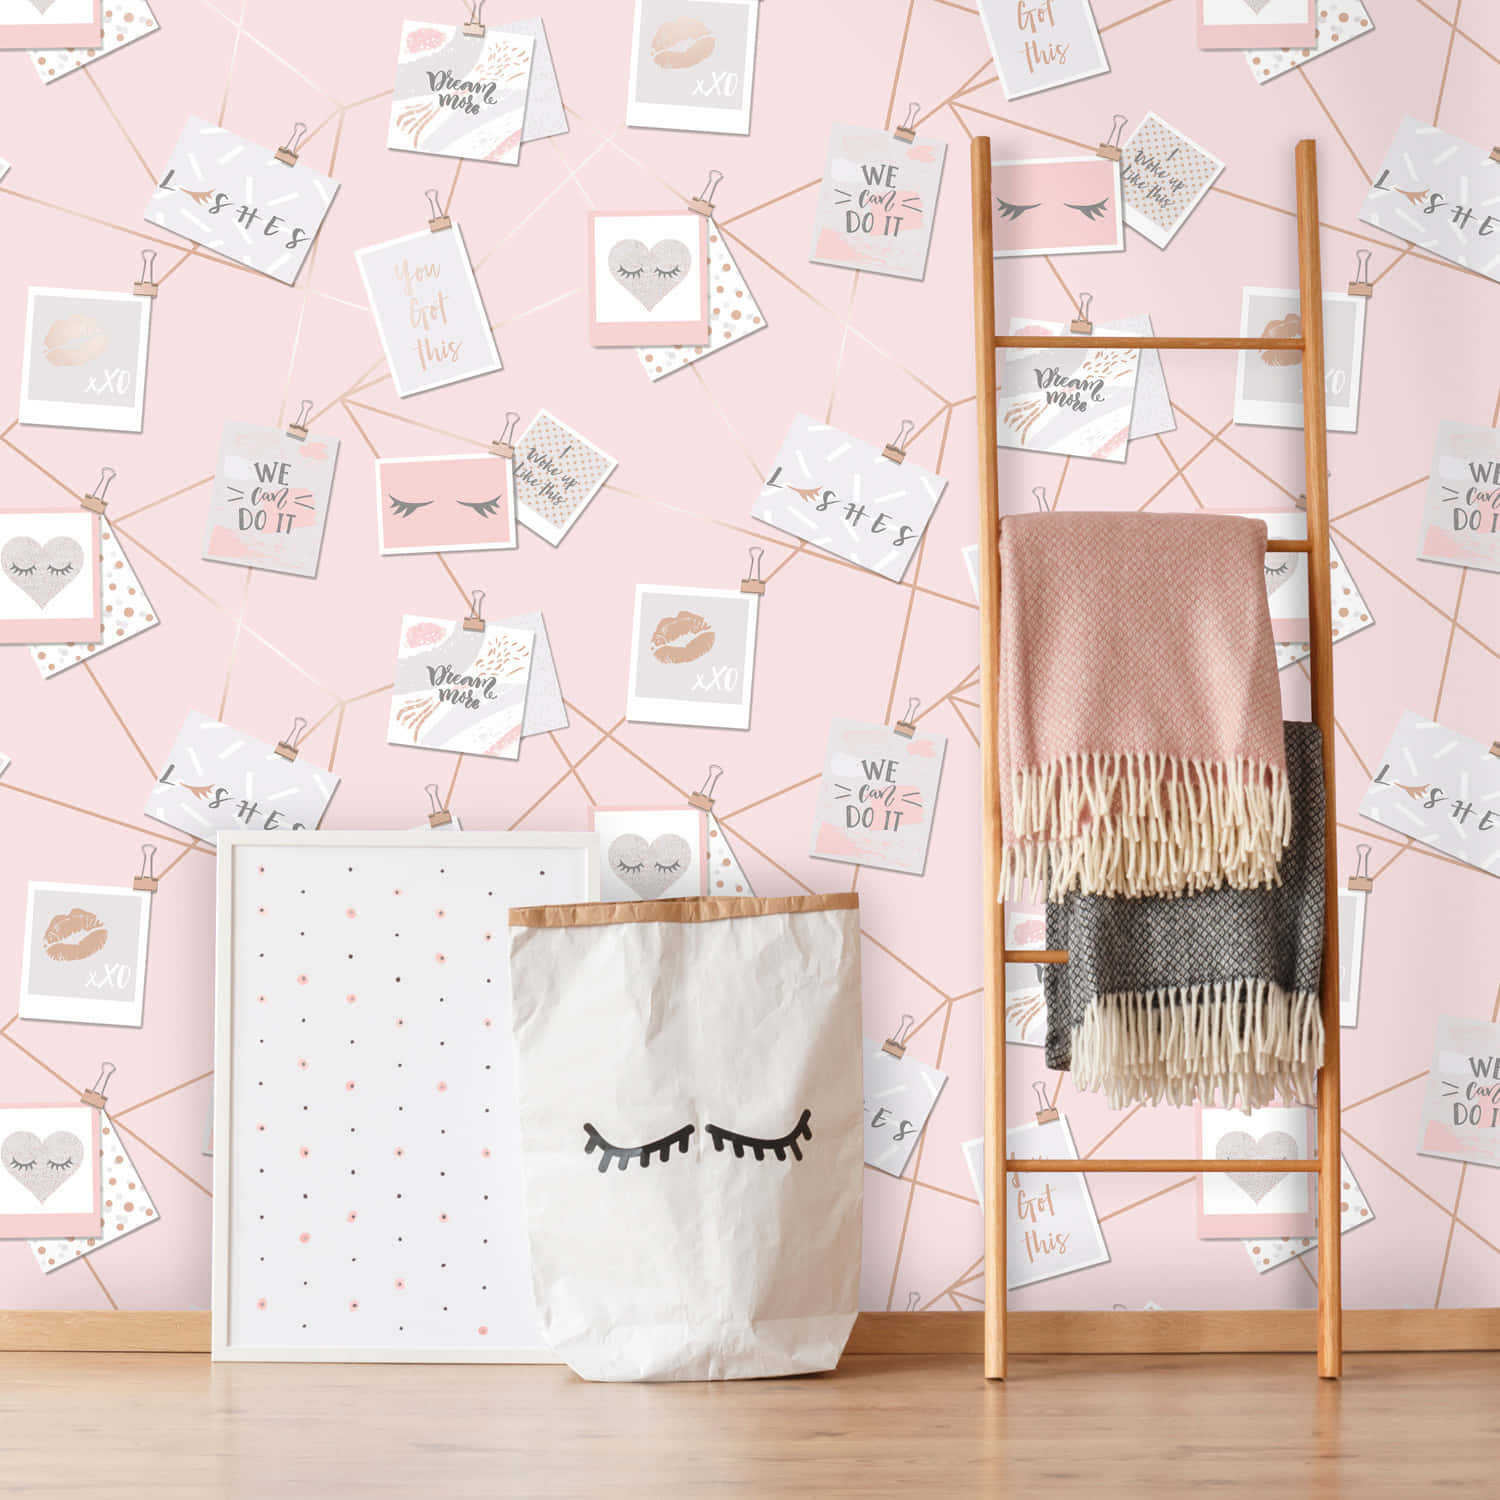 A Pink Wallpaper With Pictures And A Ladder